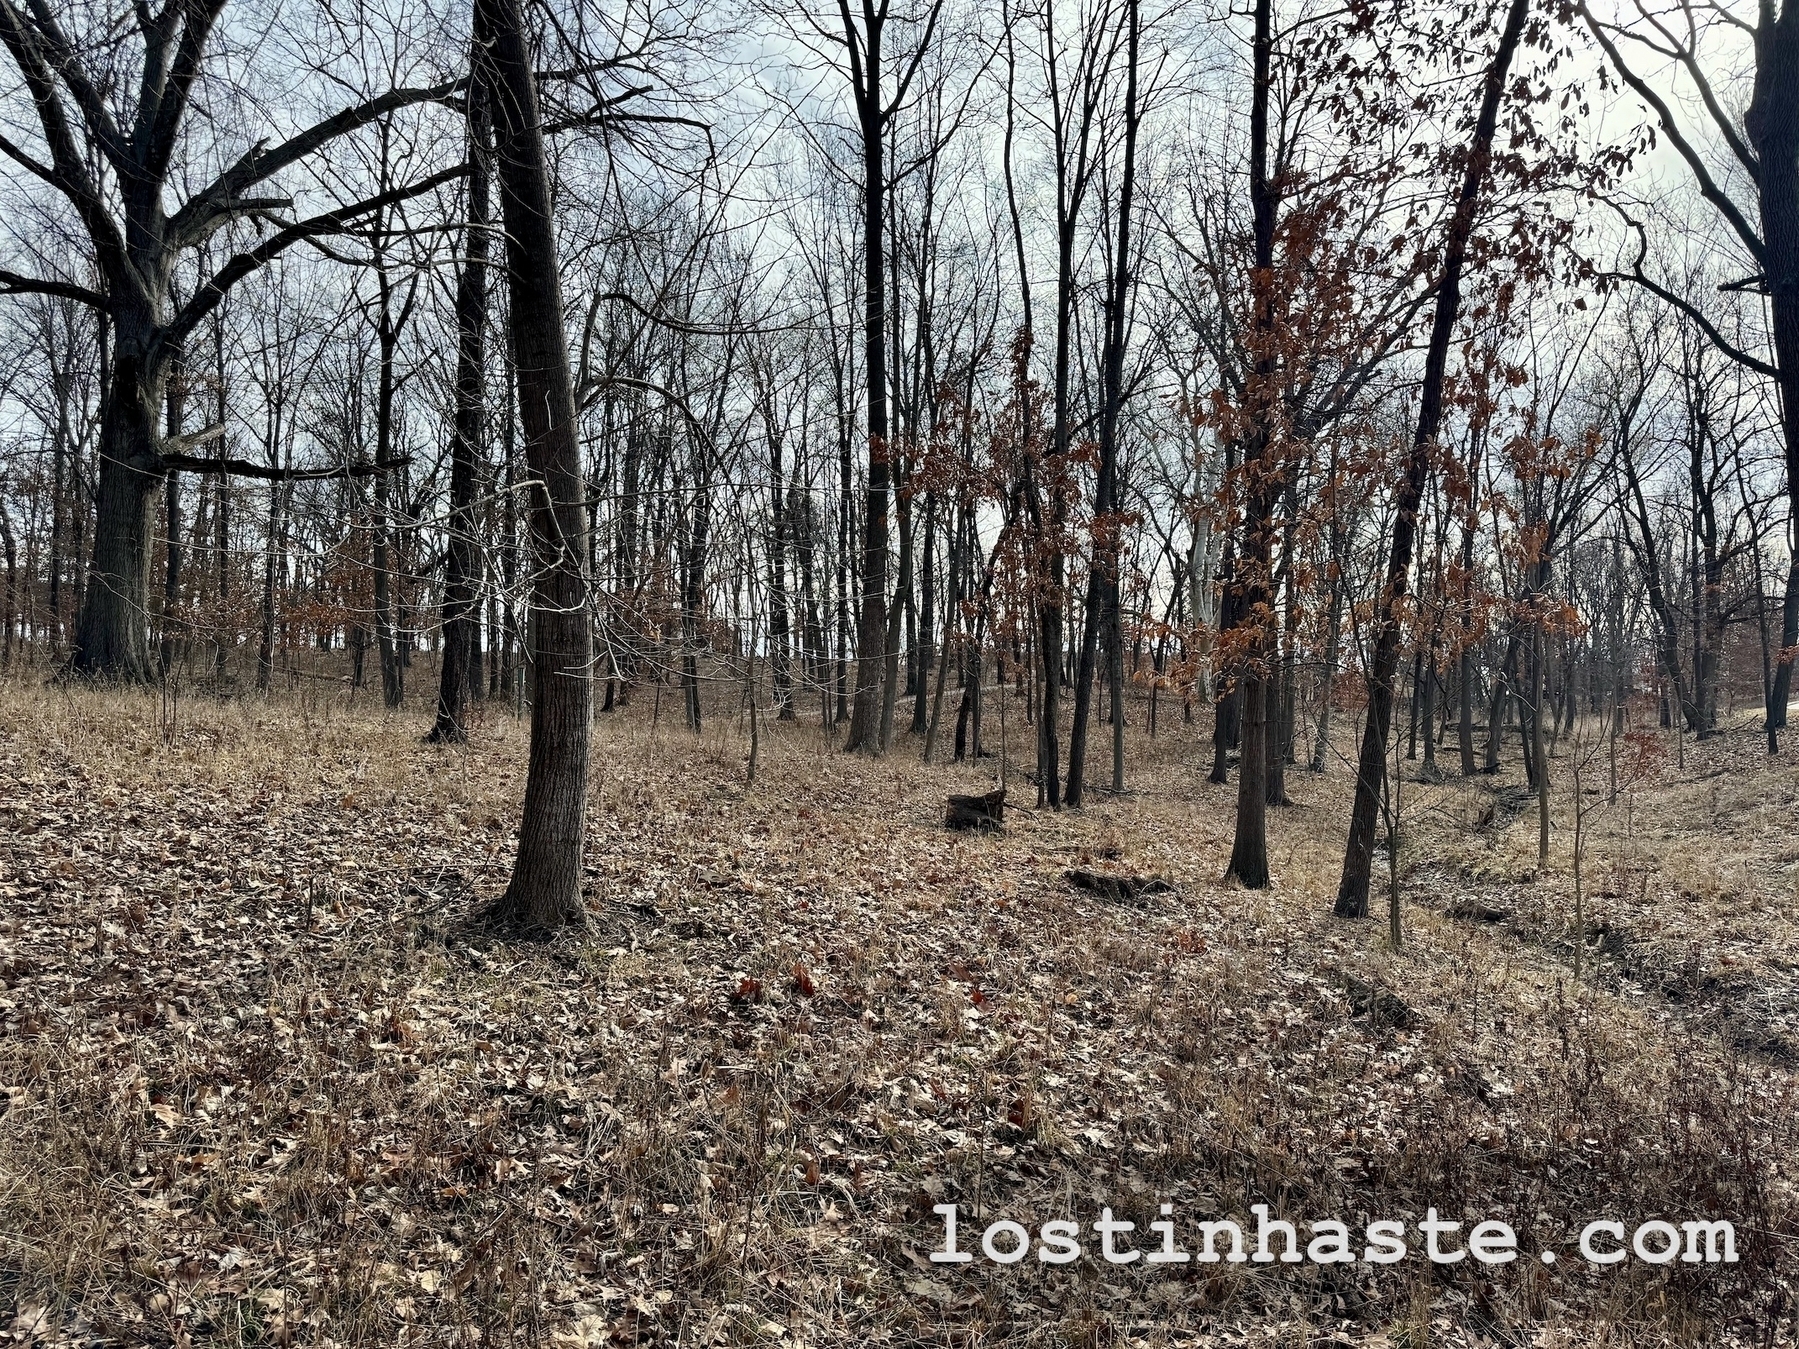 Bare trees dot a dry, leaf-strewn forest floor in a tranquil, dormant woodland setting.